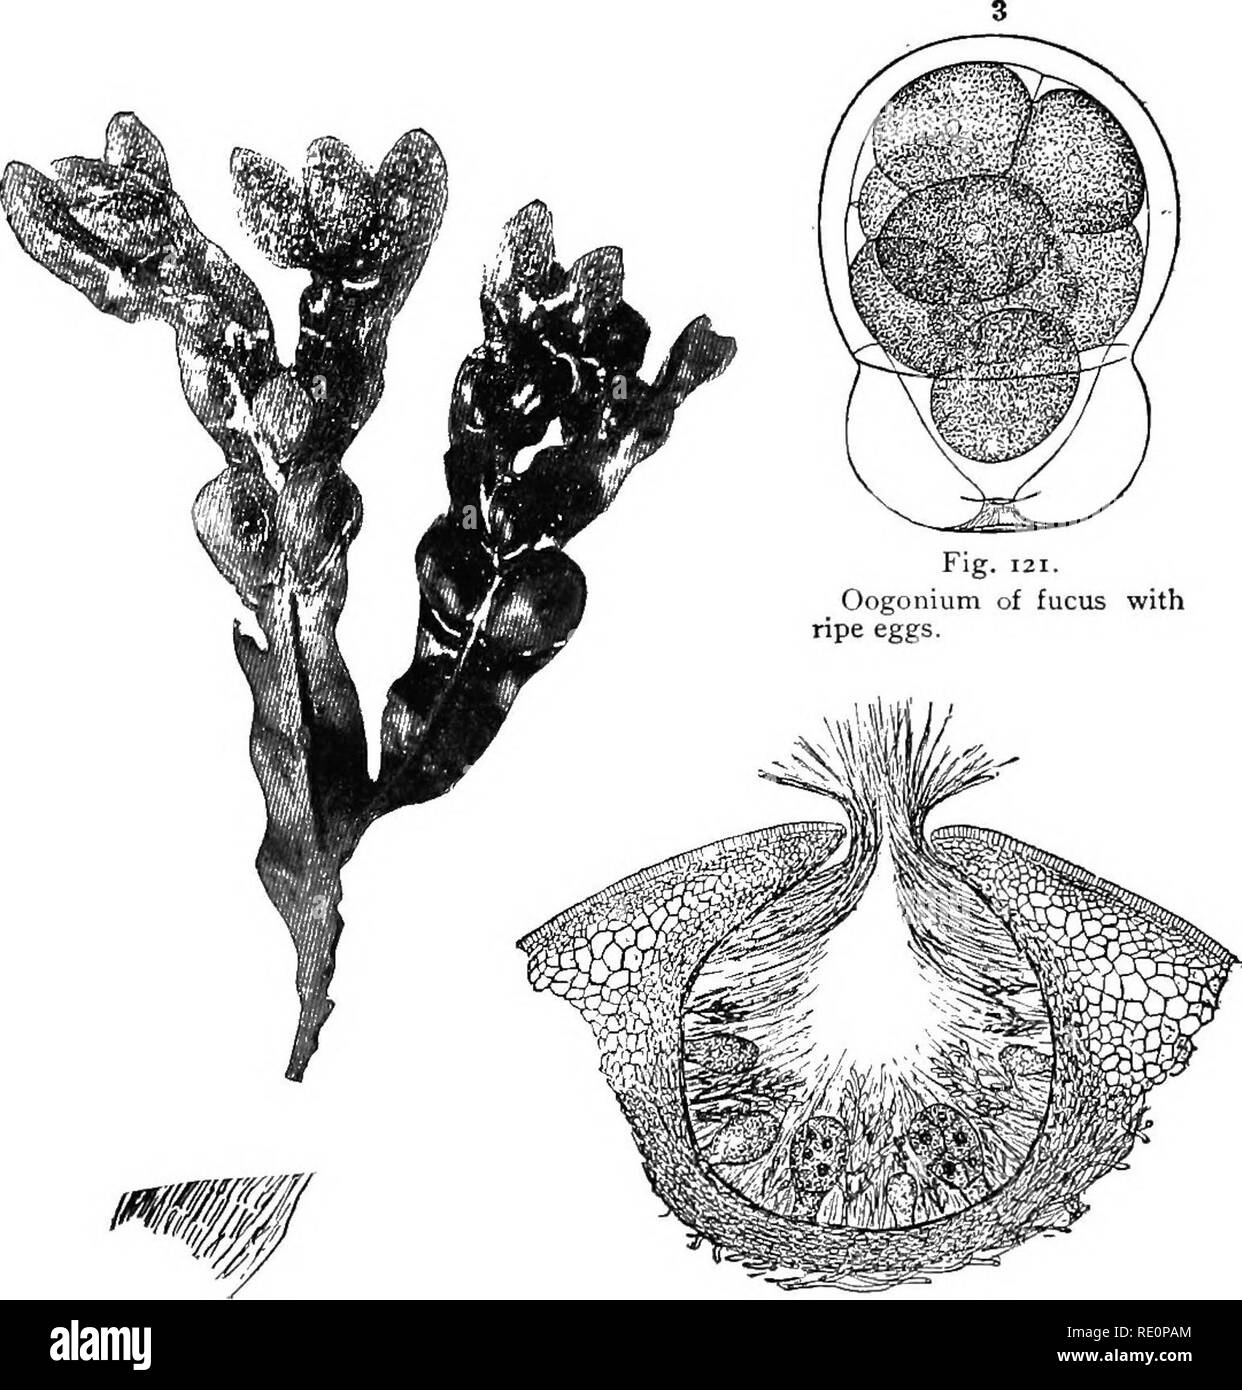 . Elementary botany. Botany. ii6 MORPHOLOG Y. 270. The red algae (Ehodophyceae).—The larger number of the so-called red alga; occur in salt water, though a few genera occur in fresh water.. Fig. 119, Portion of plant of fucus sliowing conceptacles in enlarged ends ; and below the vesicles (Fucus vescicu- losus). Fig. 120. Section of conceptacle of fucus, showing oogonia, and tufts of antheridia. (Lemanea grows only in winter in turbulent water of quite large streams. Batrachospermum grows in rather slow-running water of smaller streams. Both of these inhabit fresh water.) The plants of the gro Stock Photo